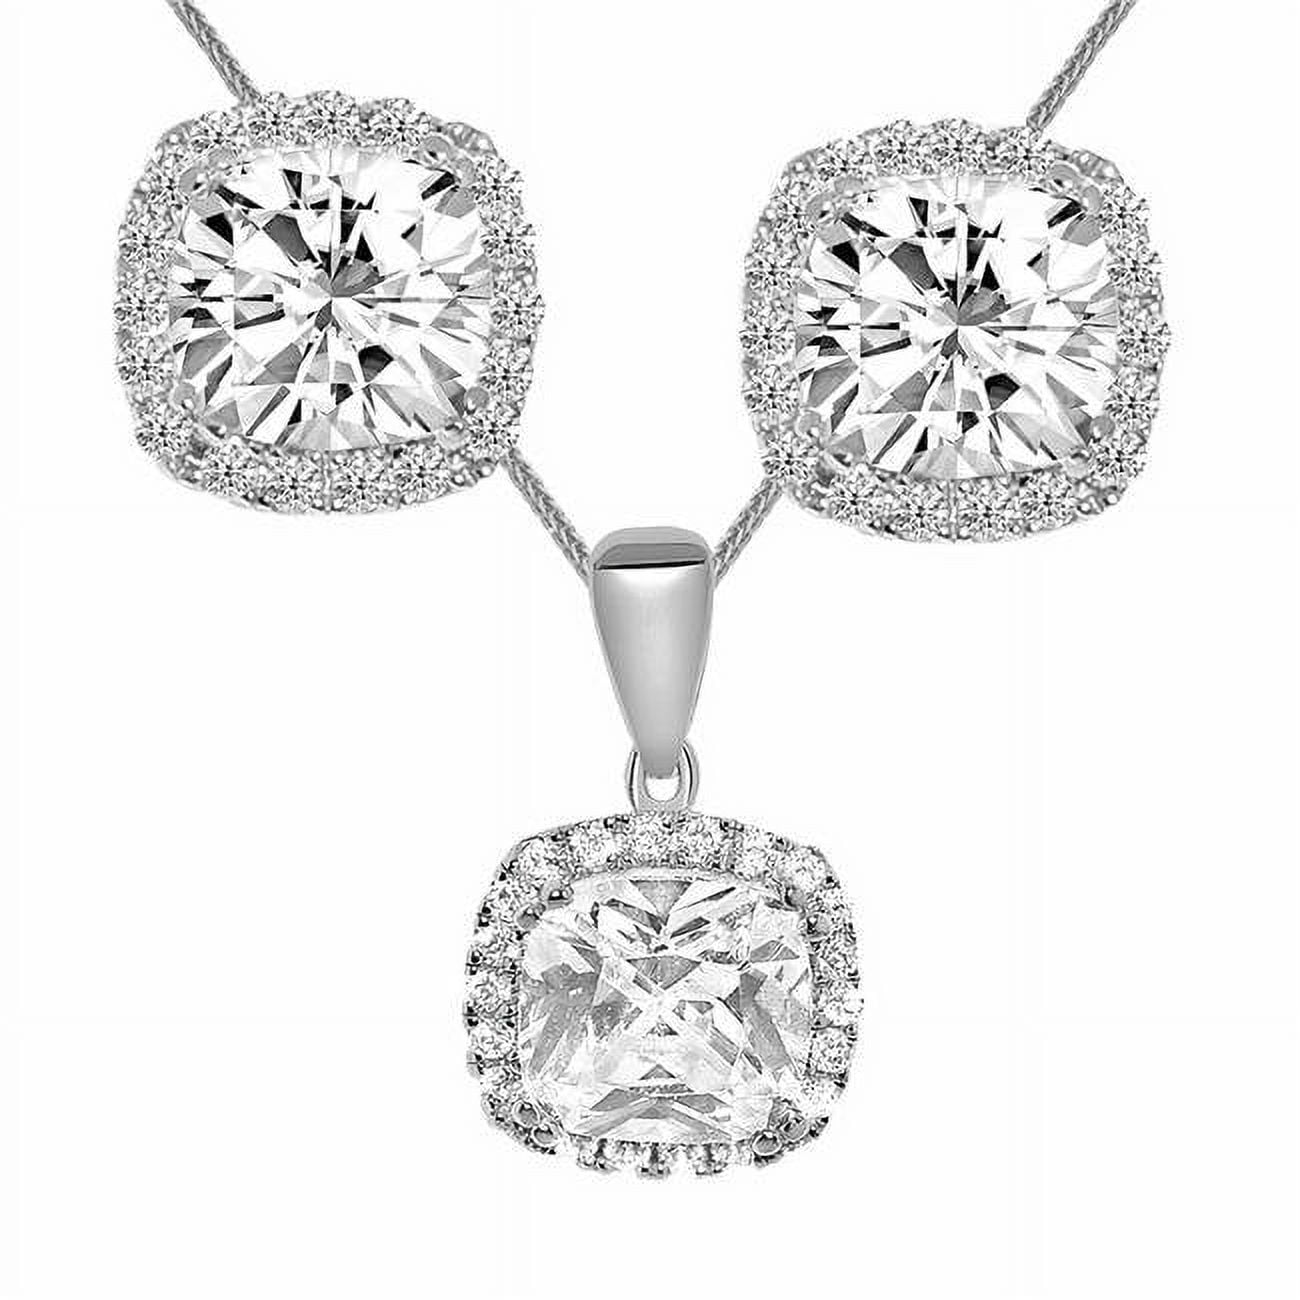 Picture of Precious Stars EP1694-2489-C195-20 20 in. 14K White Gold Cushion-Cut Cubic Zirconia Halo Earring Pendant Set